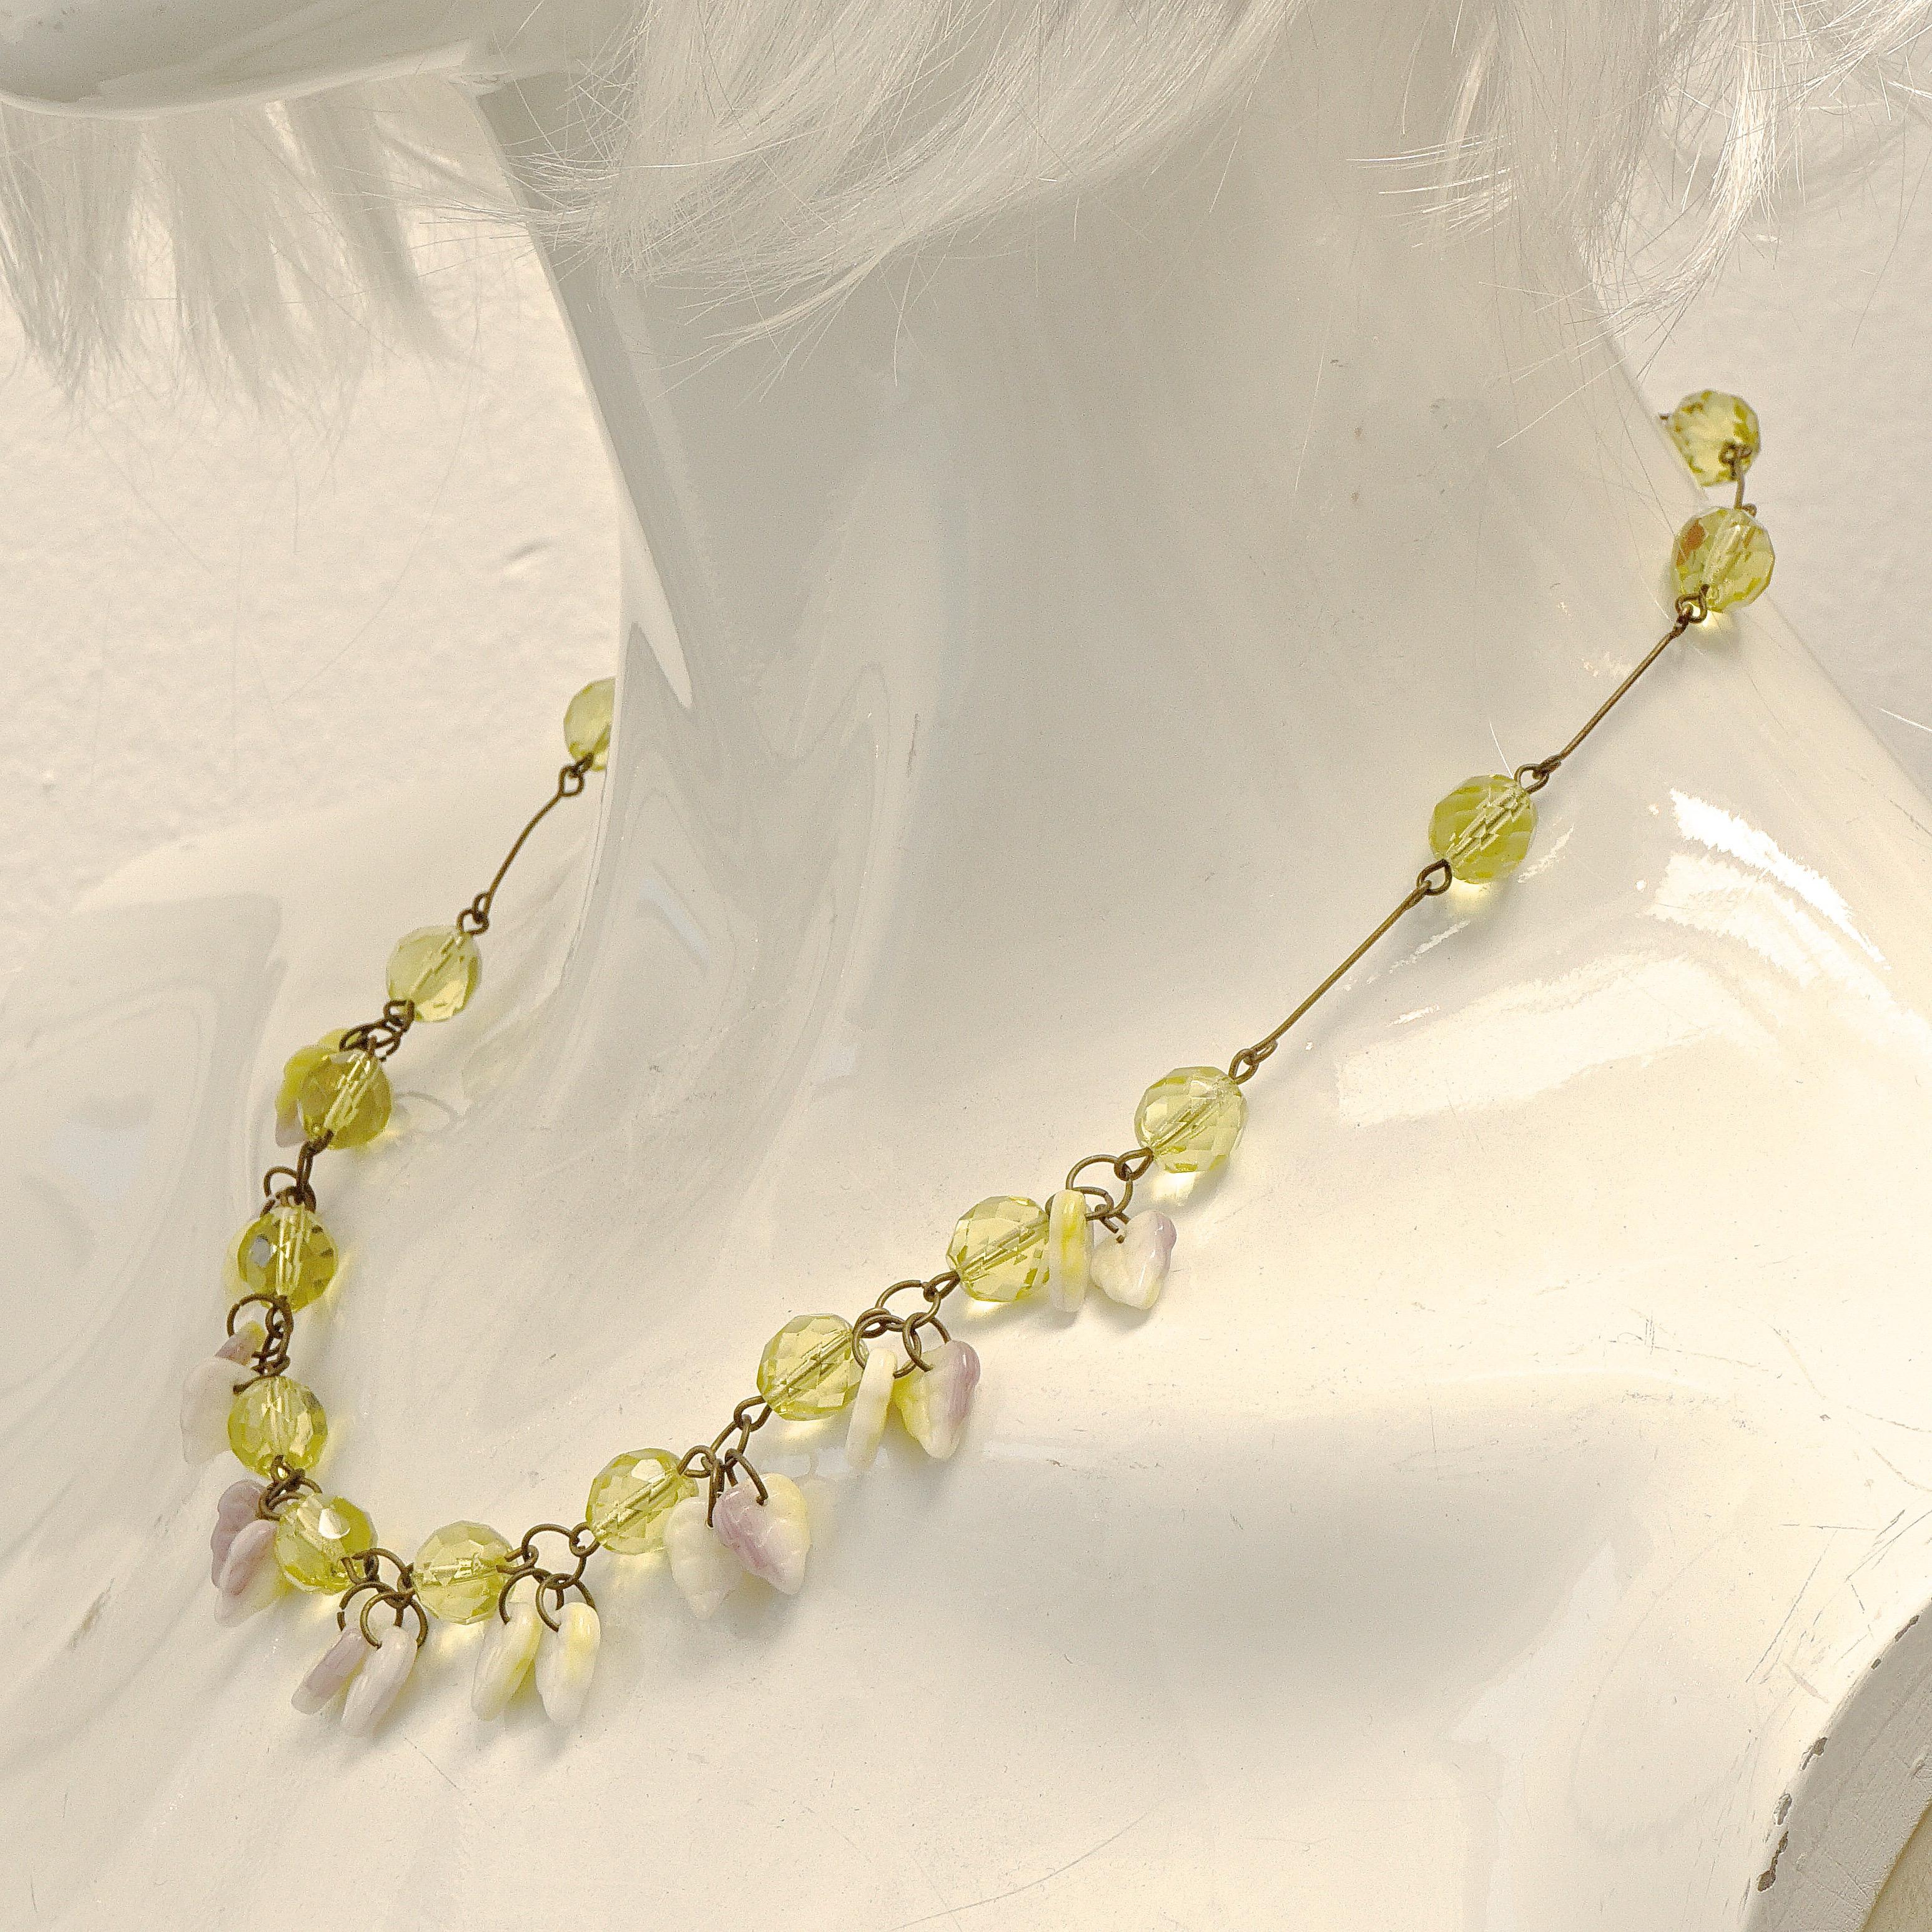 Art Deco Czech Citrine Glass Necklace with White, Citrine and Lilac Glass Leaves In Good Condition For Sale In London, GB